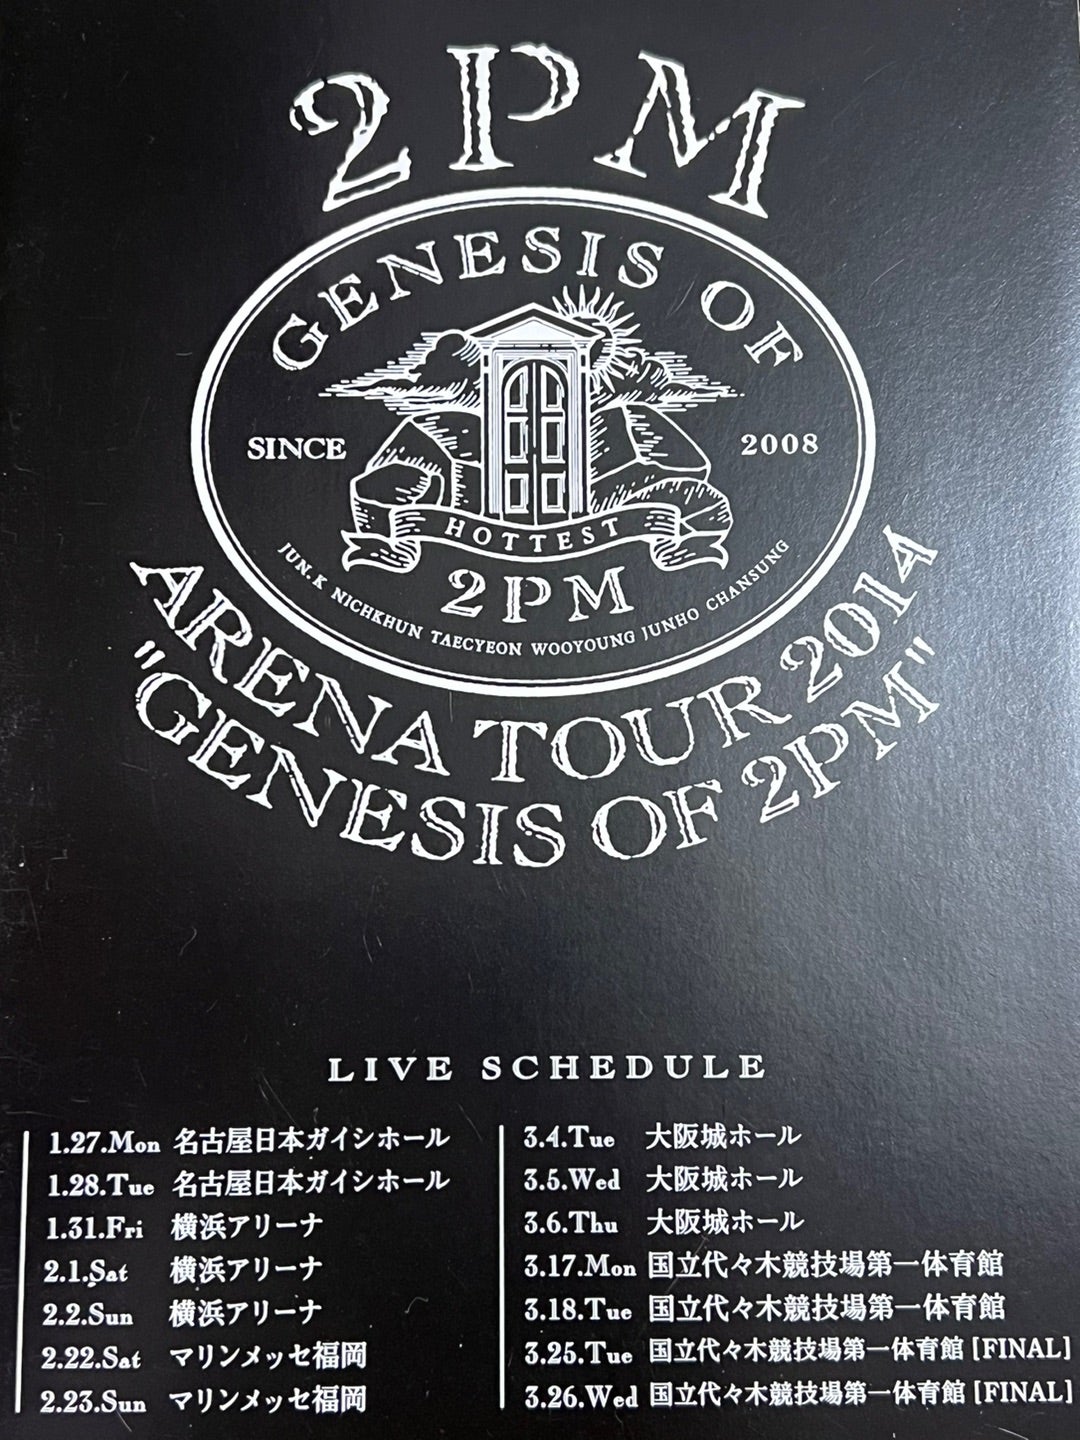 2014☆GENESIS OF 2PM【グッズパンフレット】 | JUNHO活☆Diary by Miho